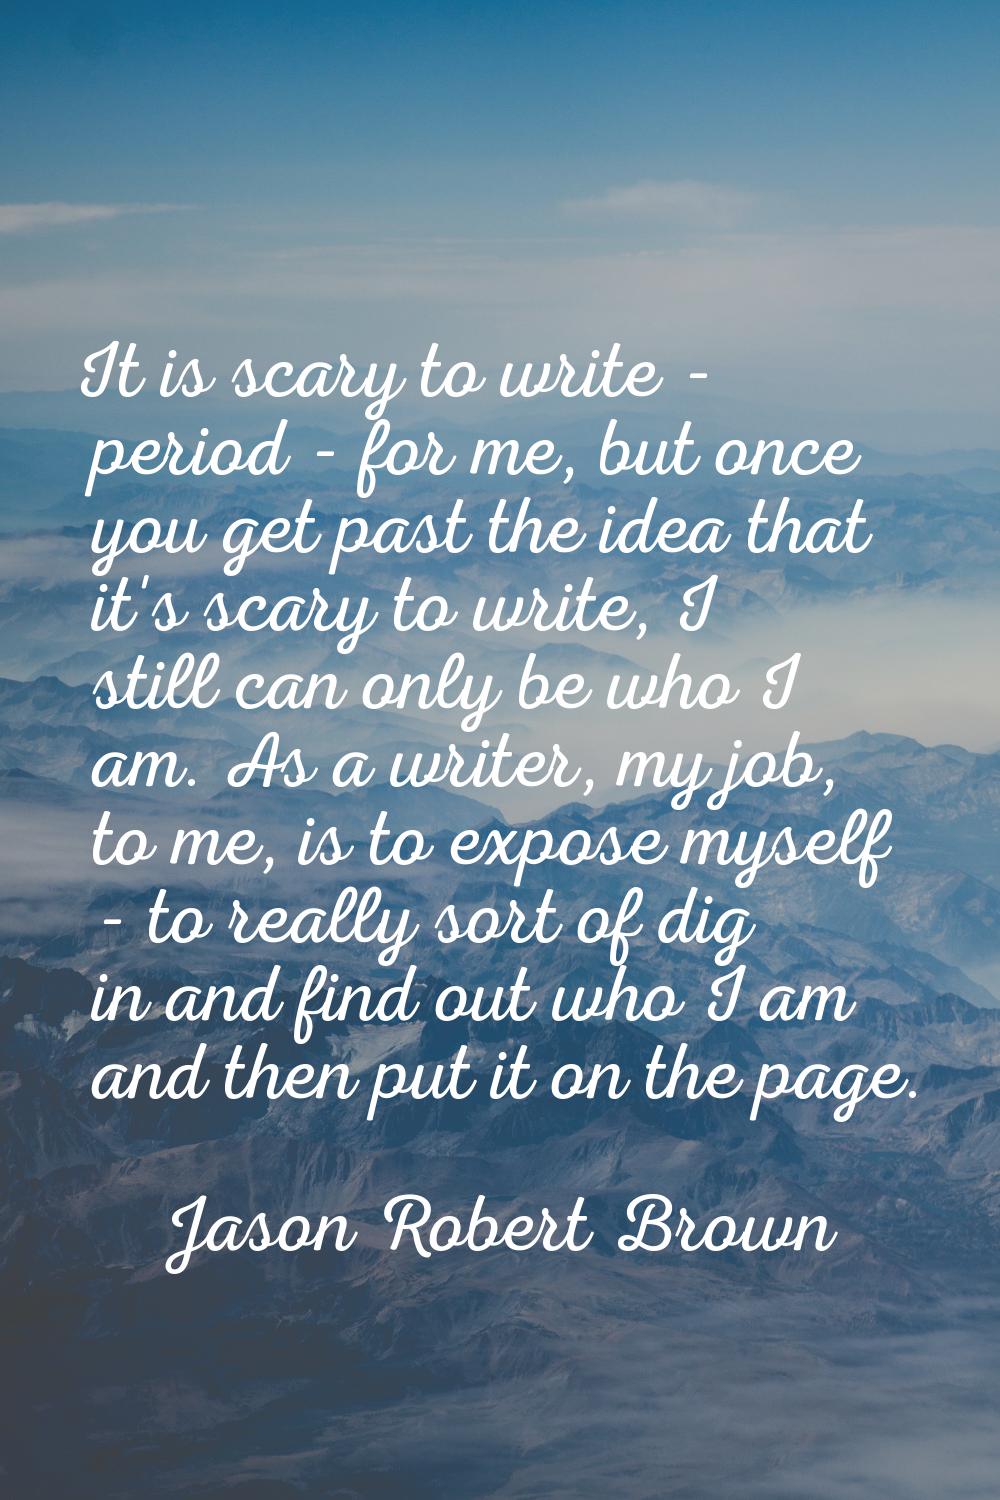 It is scary to write - period - for me, but once you get past the idea that it's scary to write, I 